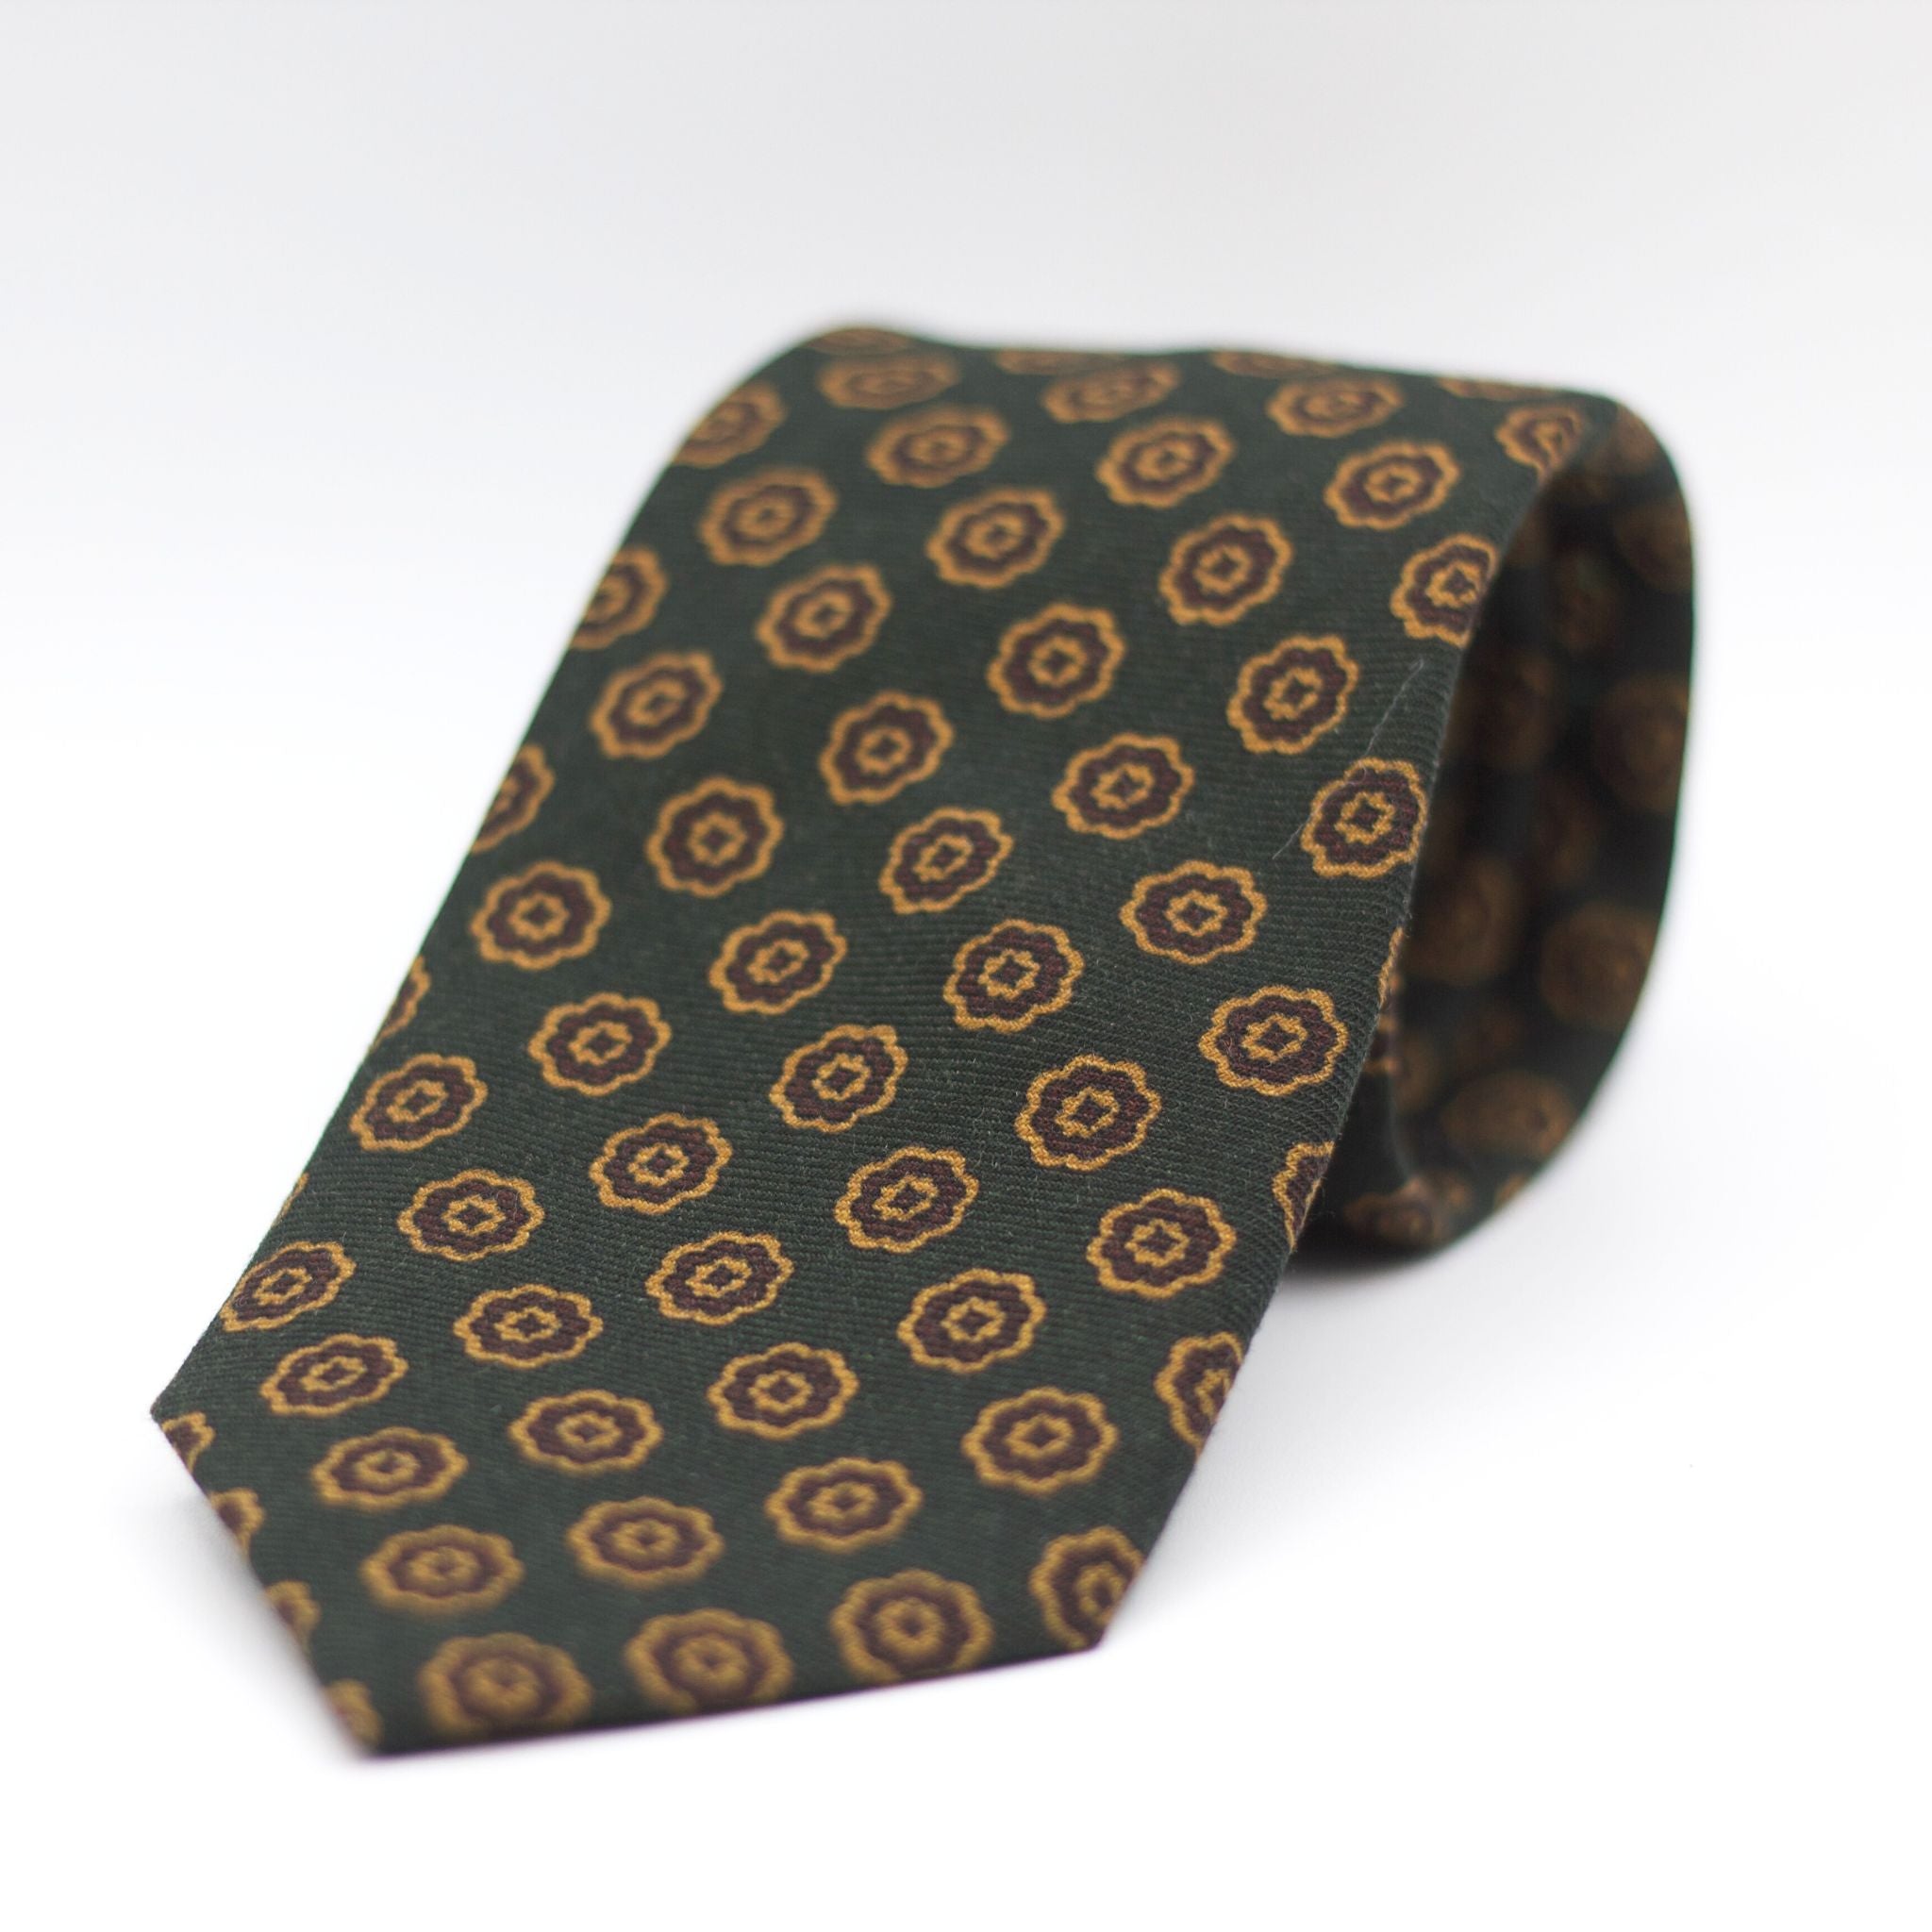 Holliday & Brown for Cruciani & Bella 100% Printed Wool  Self-Tipped Forrest Green, Military Green and Cream Motif Tie Handmade in Italy 8 cm x 148 cm